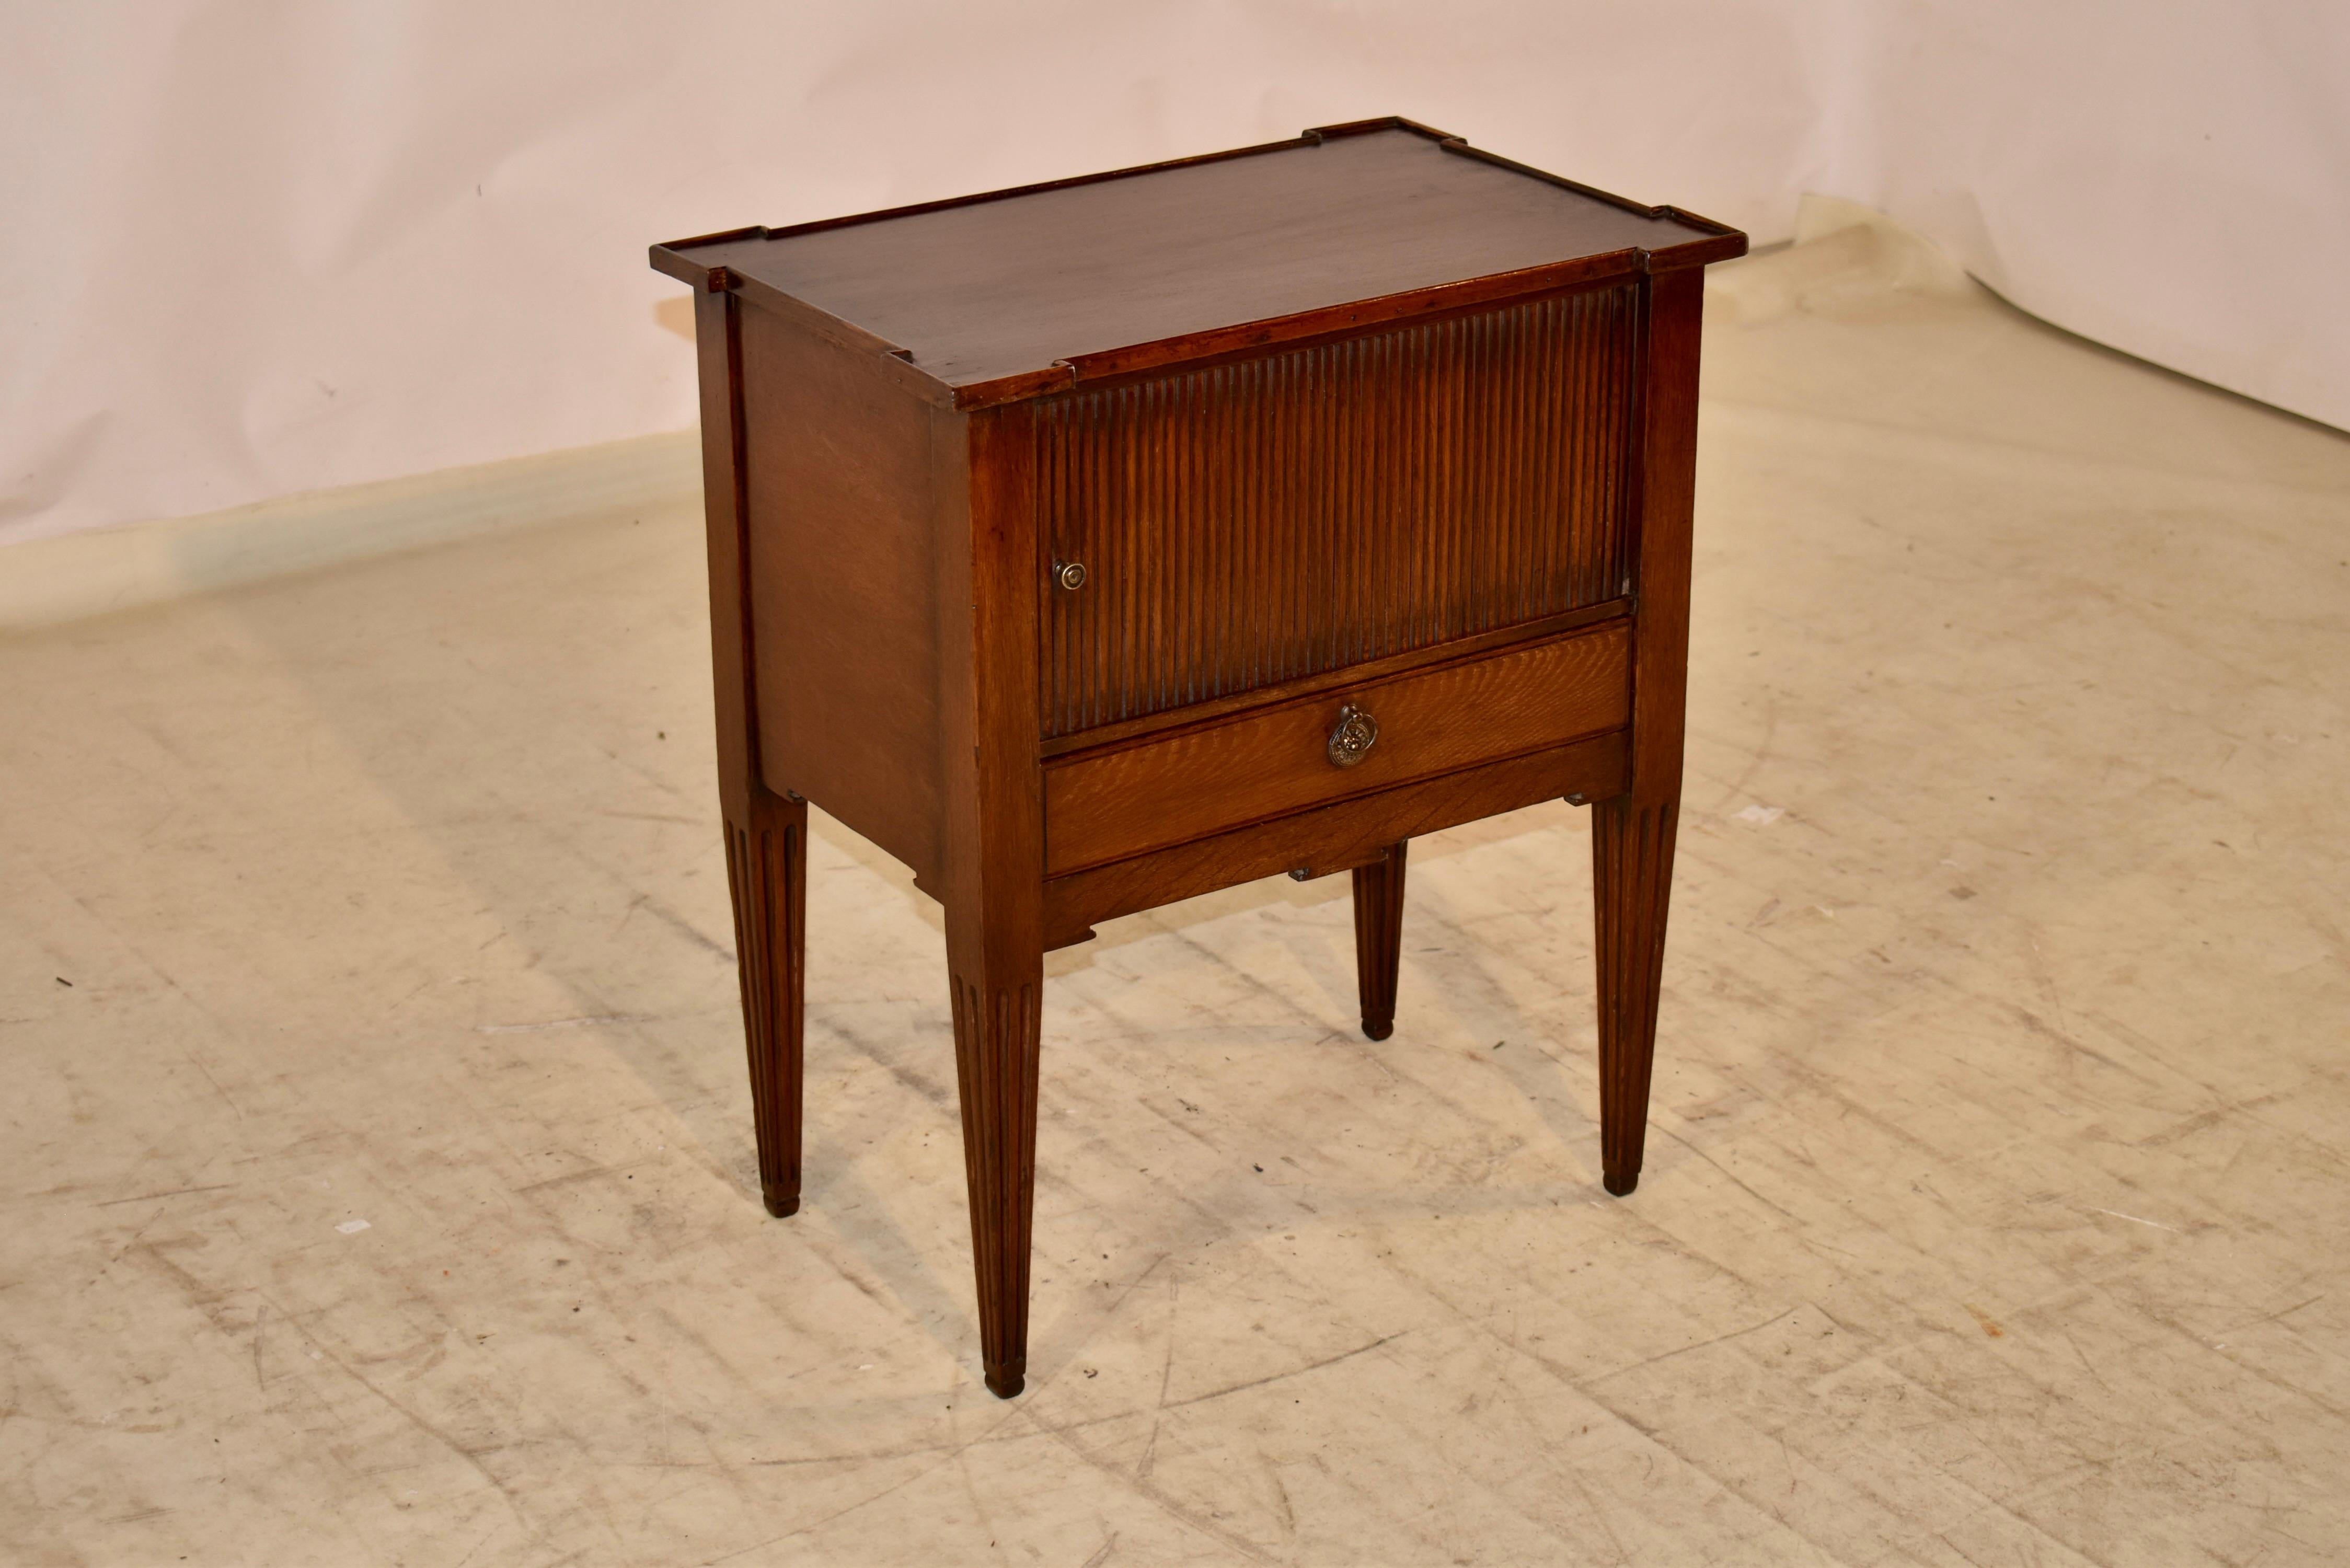 Early Georgian Mahogany Bedside Cupboard In Good Condition For Sale In High Point, NC